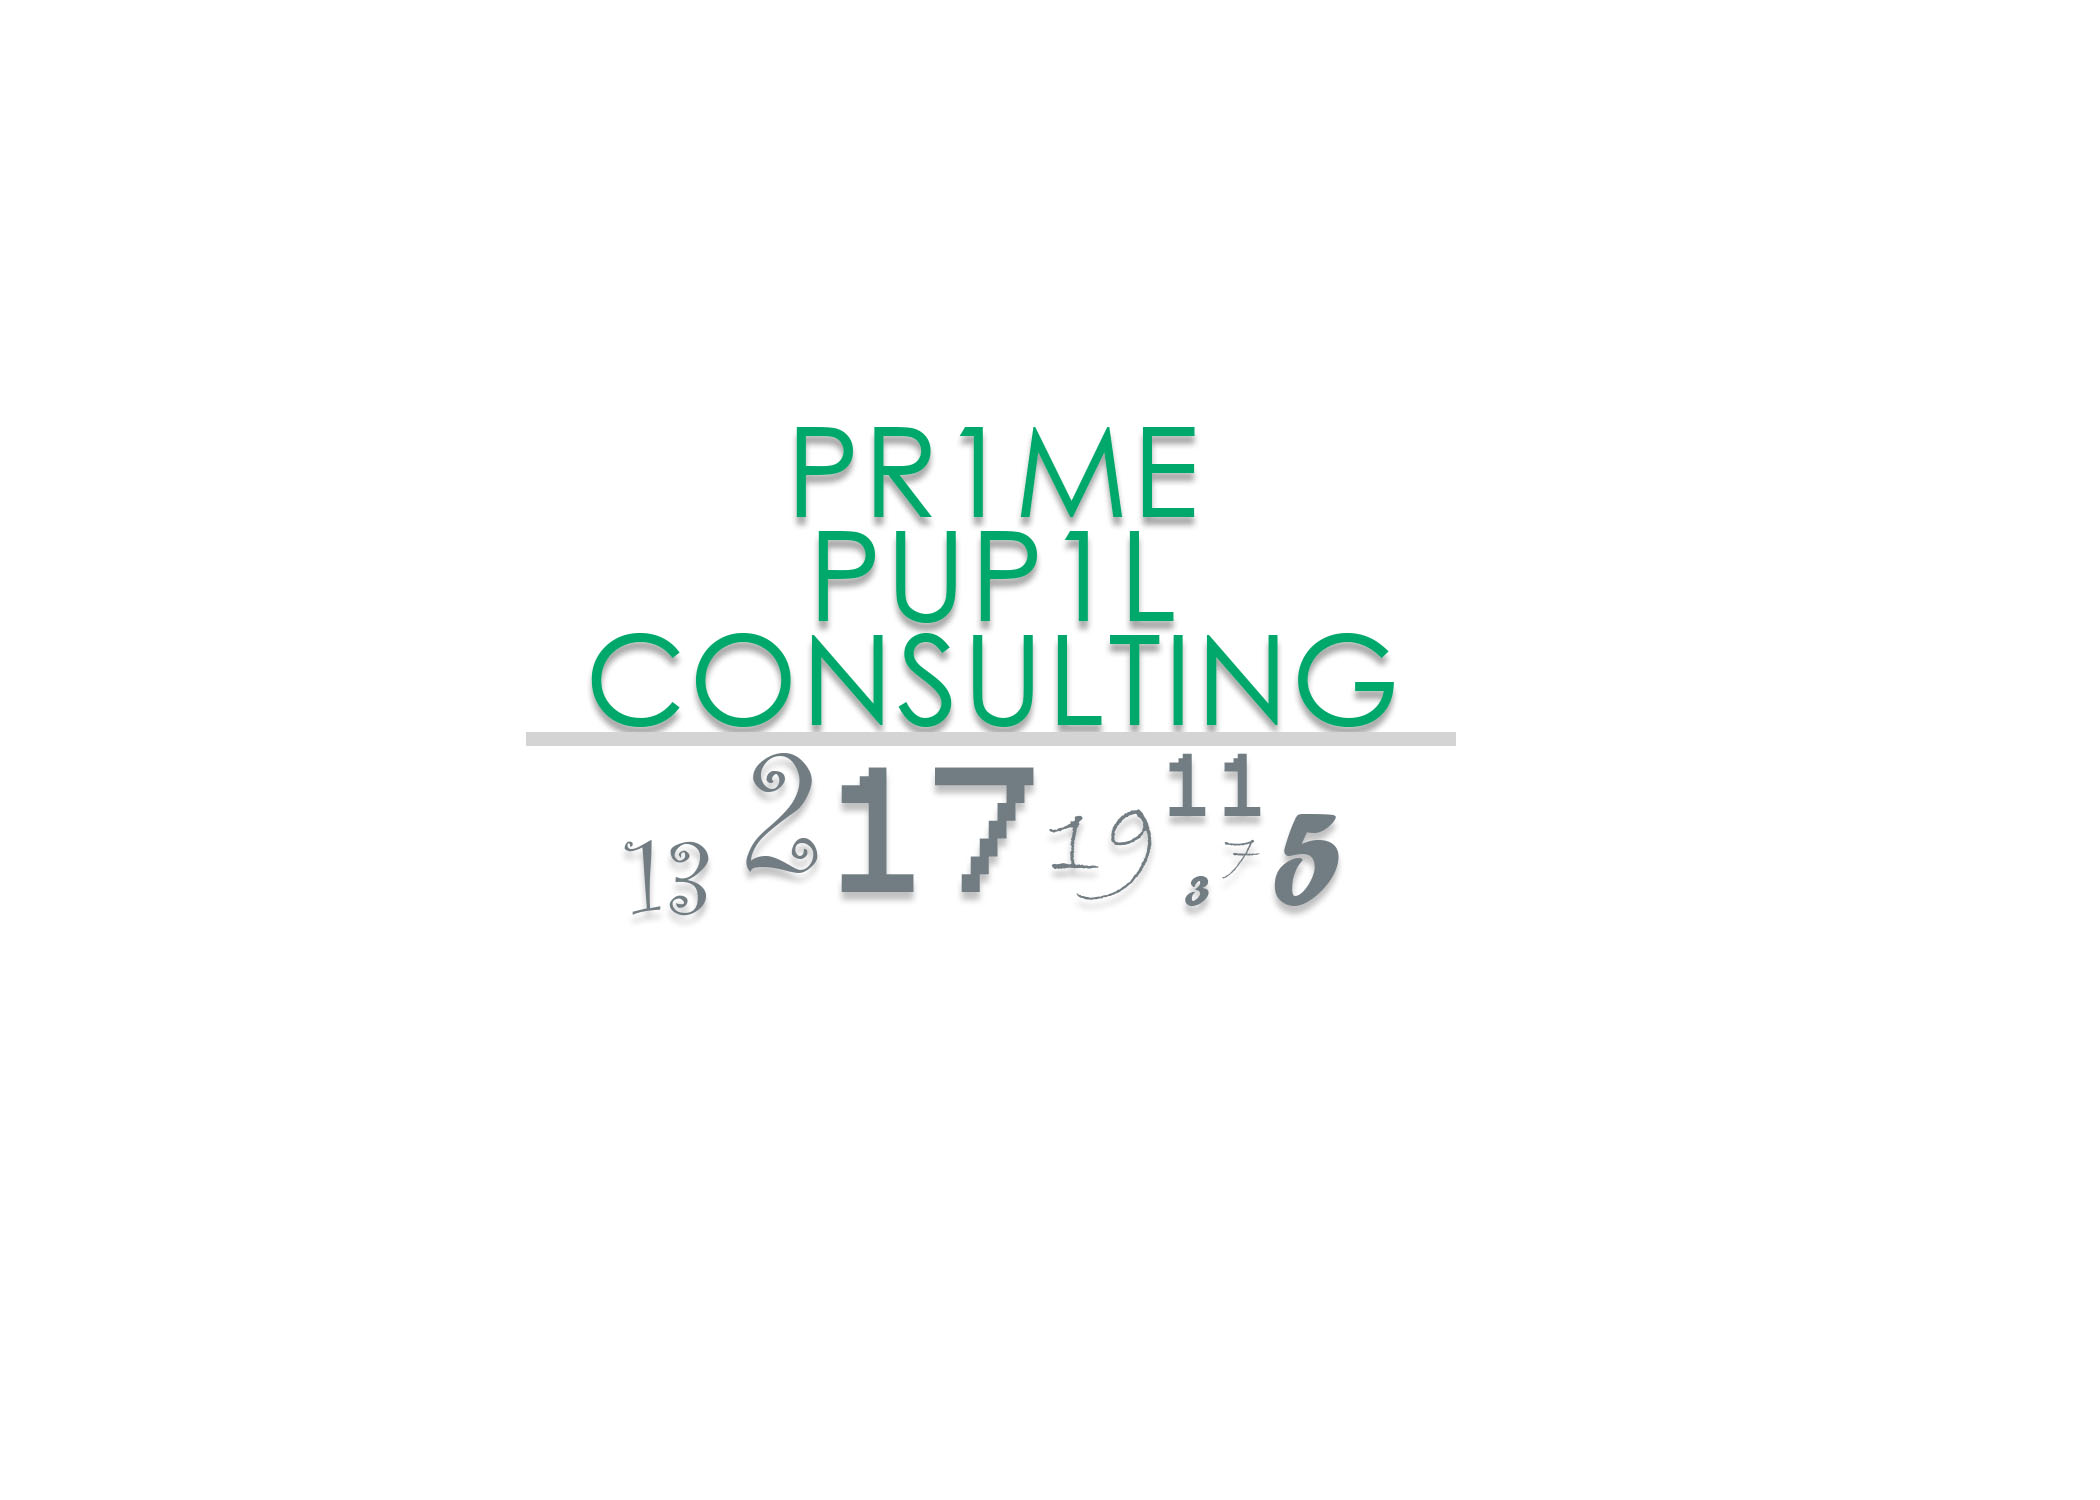 Prime Pupil Consulting.jpg